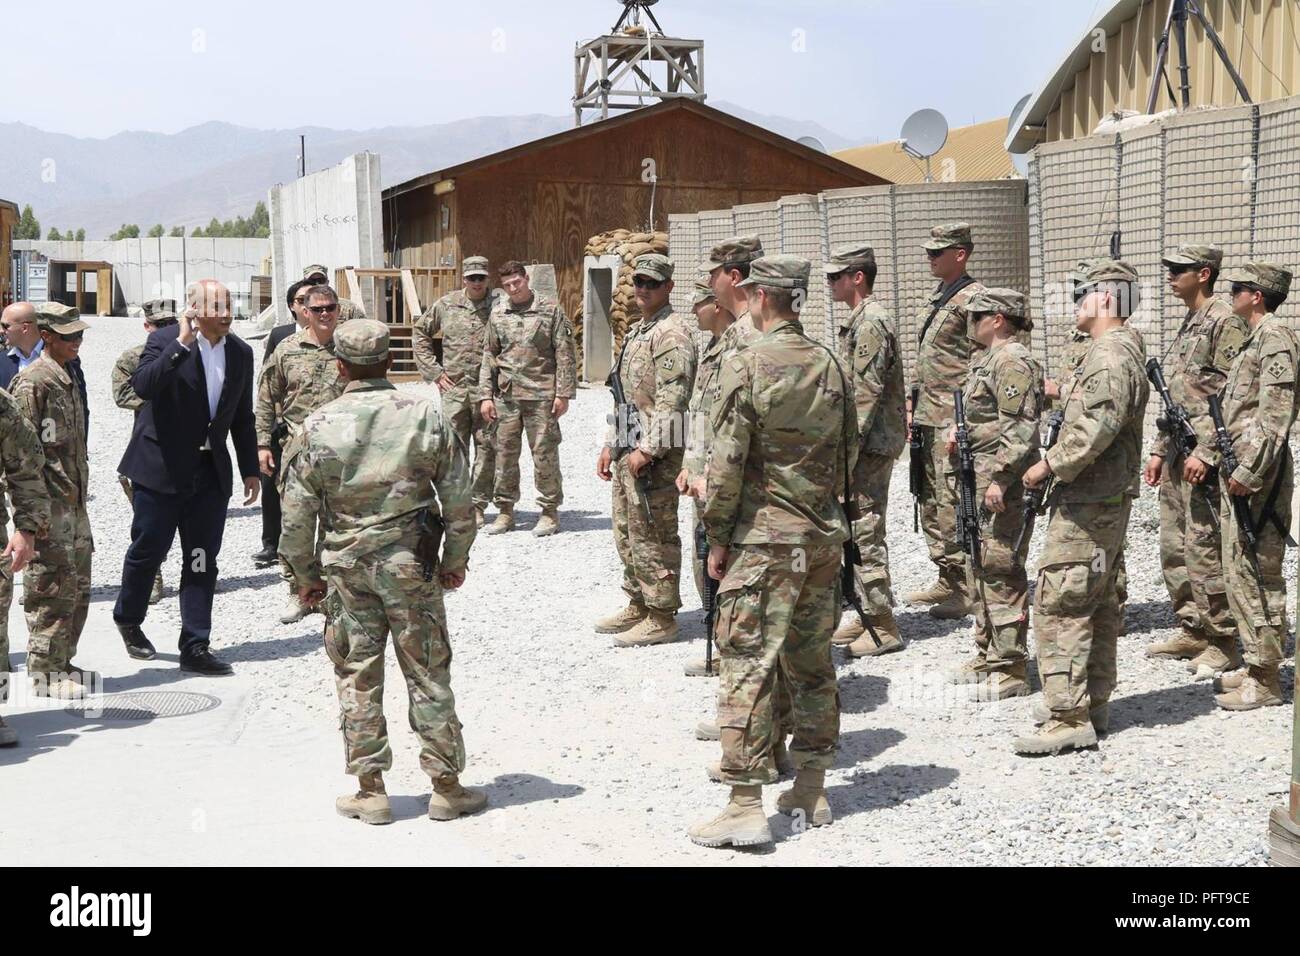 Senator Cory Booker visits 1st Stryker Brigade Combat Team, 4th Infantry Division assigned to Train Advise Assist Command - East in Afghanistan on May 26, 2018. Sen. Booker interacted with Soldiers while touring the base and received an operational and intelligence brief from the senior staff. As the Senator from New Jersey departed, TAAC-E command team and Soldiers expressed their gratitude for his visit and Sen. Booker said, 'Thank you, I am grateful for your service.' Stock Photo